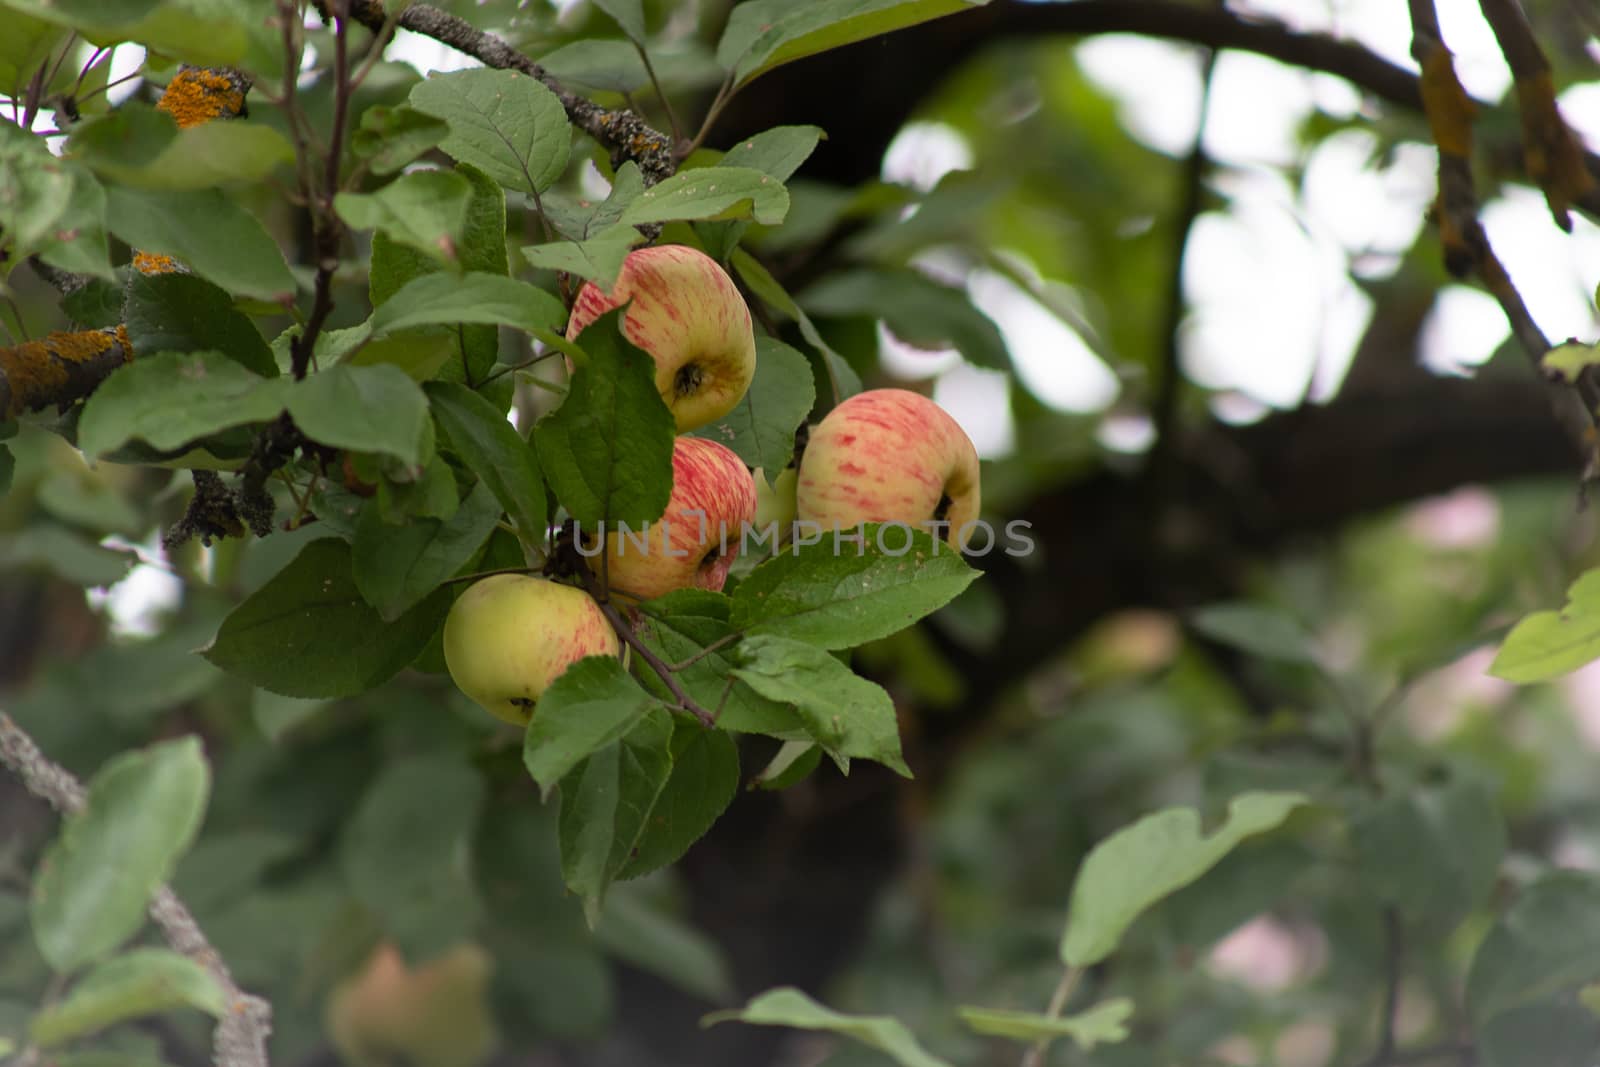 Organic apples hanging from a tree branch, apple fruit close up, large ripe apples clusters hanging heap on a tree branch in an intense apple orchard